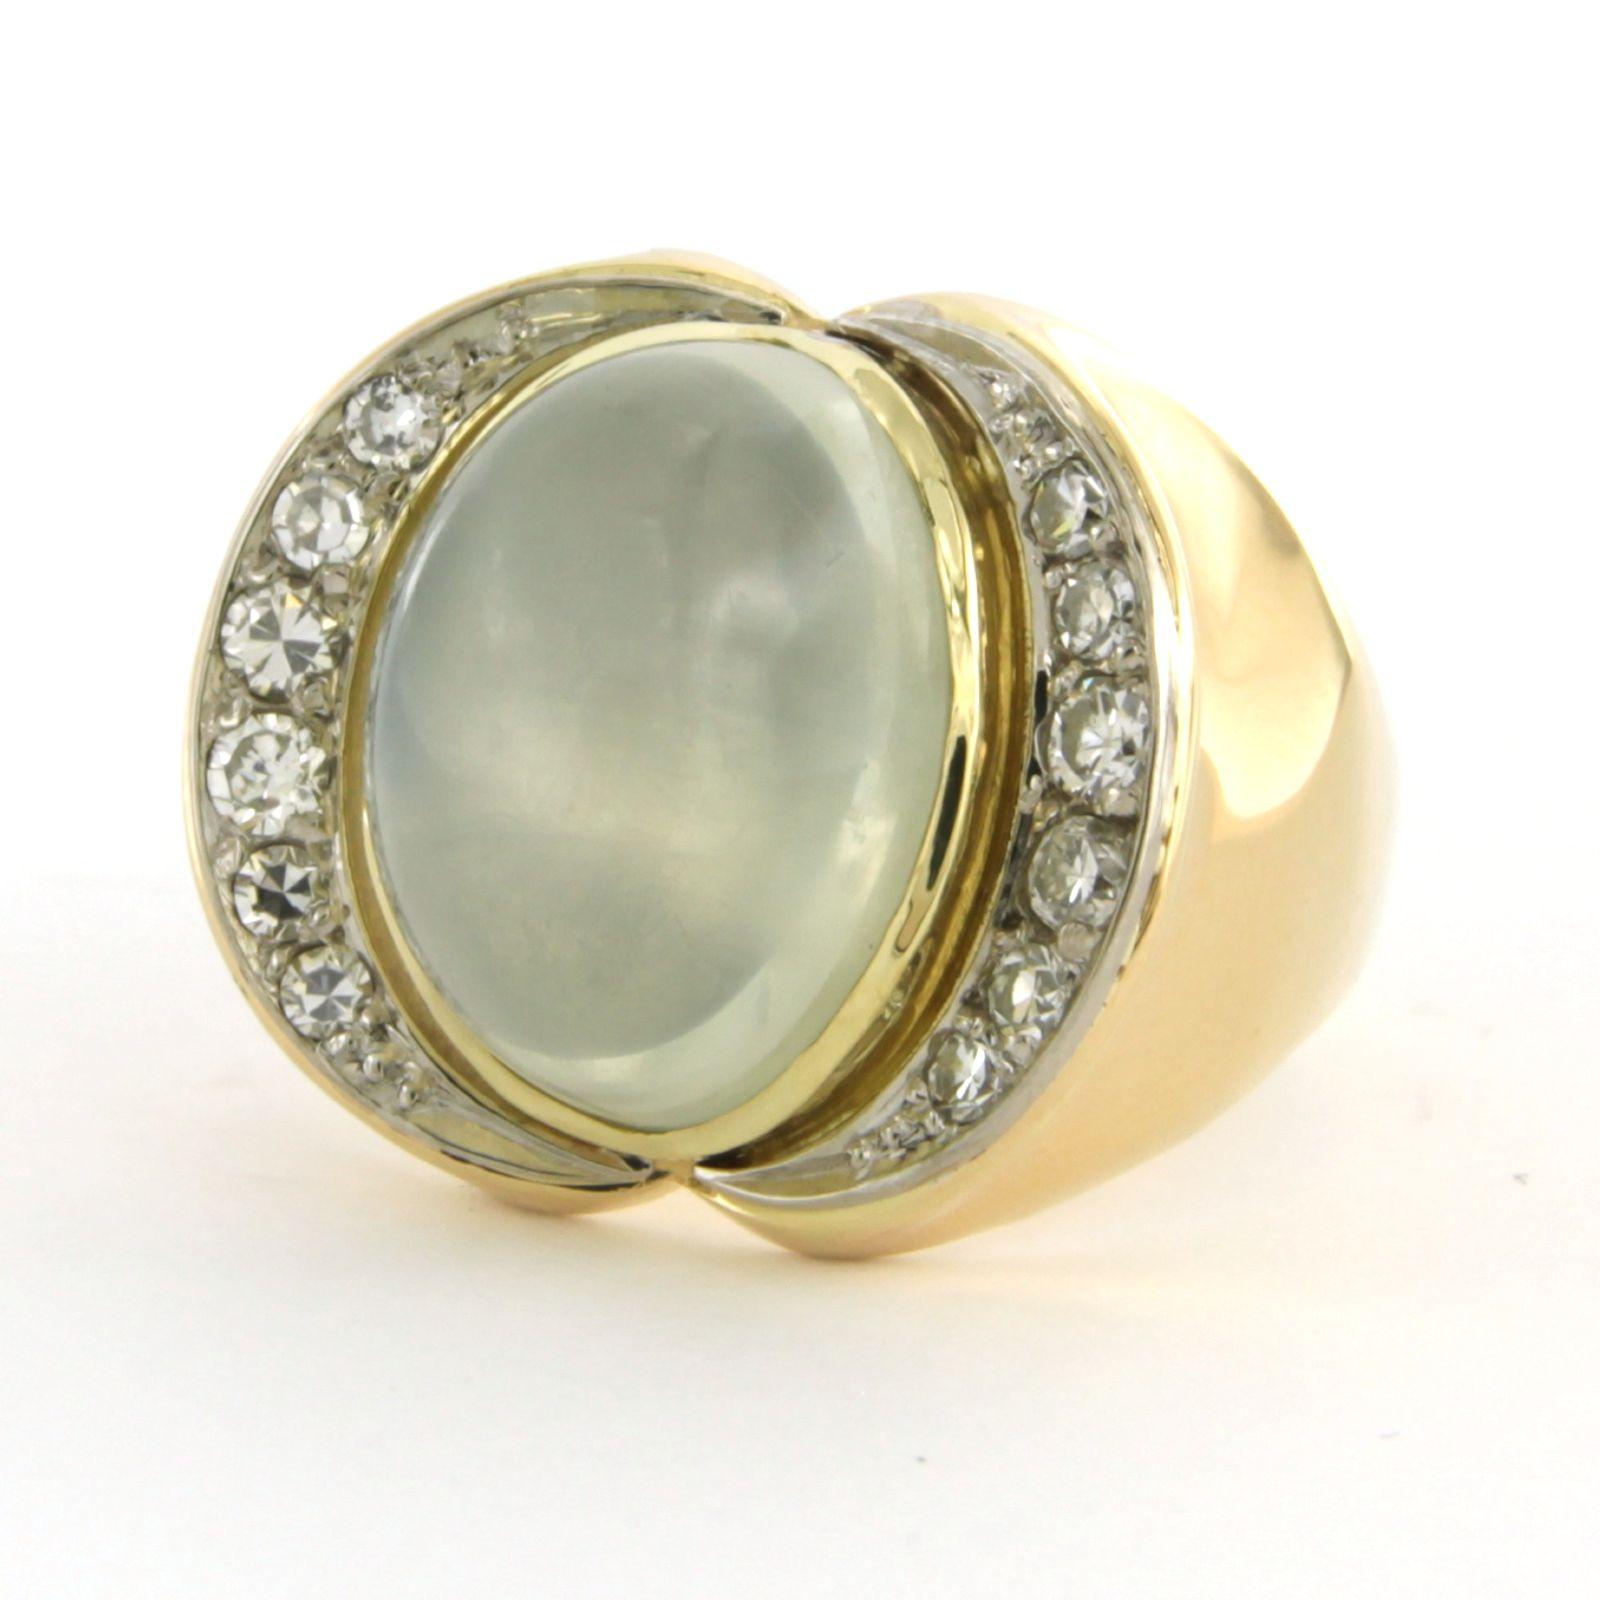 Brilliant Cut Ring with moonstone nd diamonds 18k bicolour gold